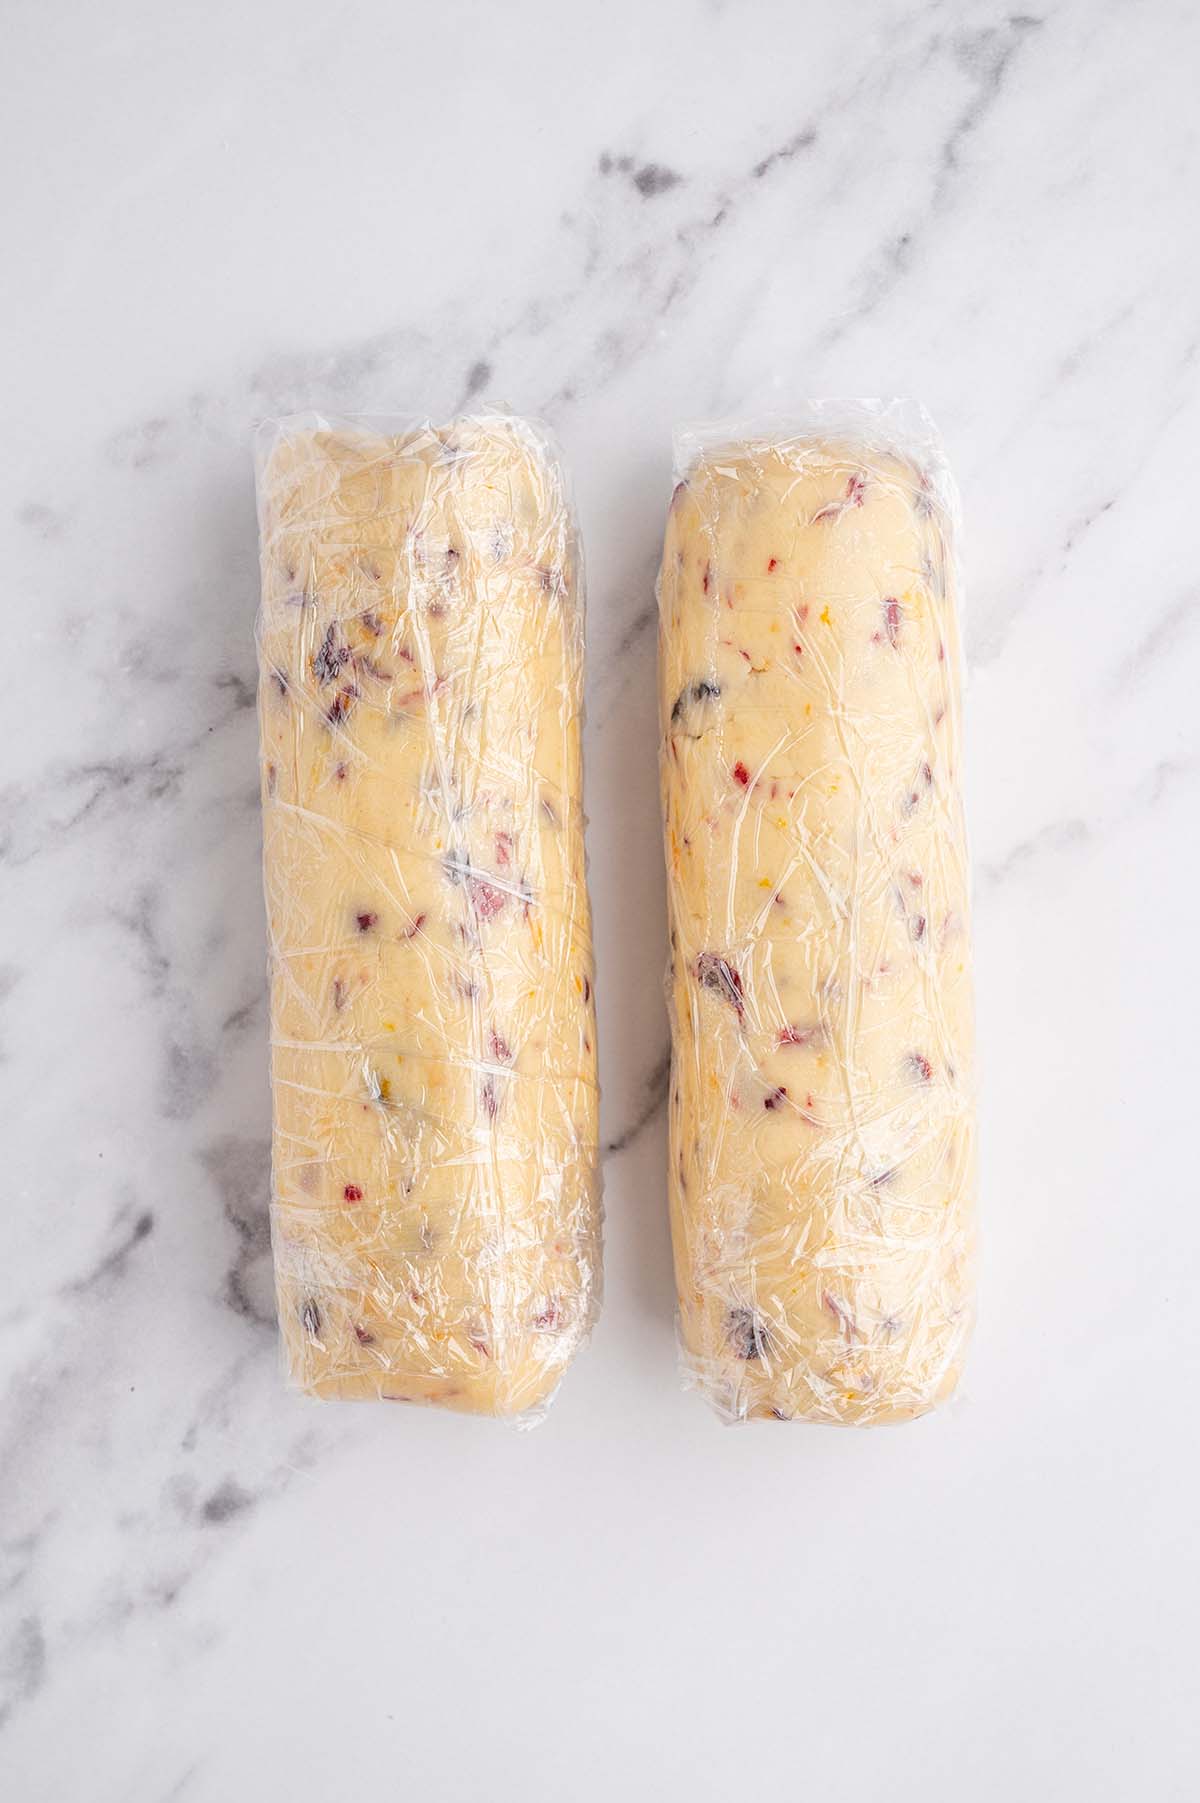 Two cookie dough logs wrapped in plastic. 